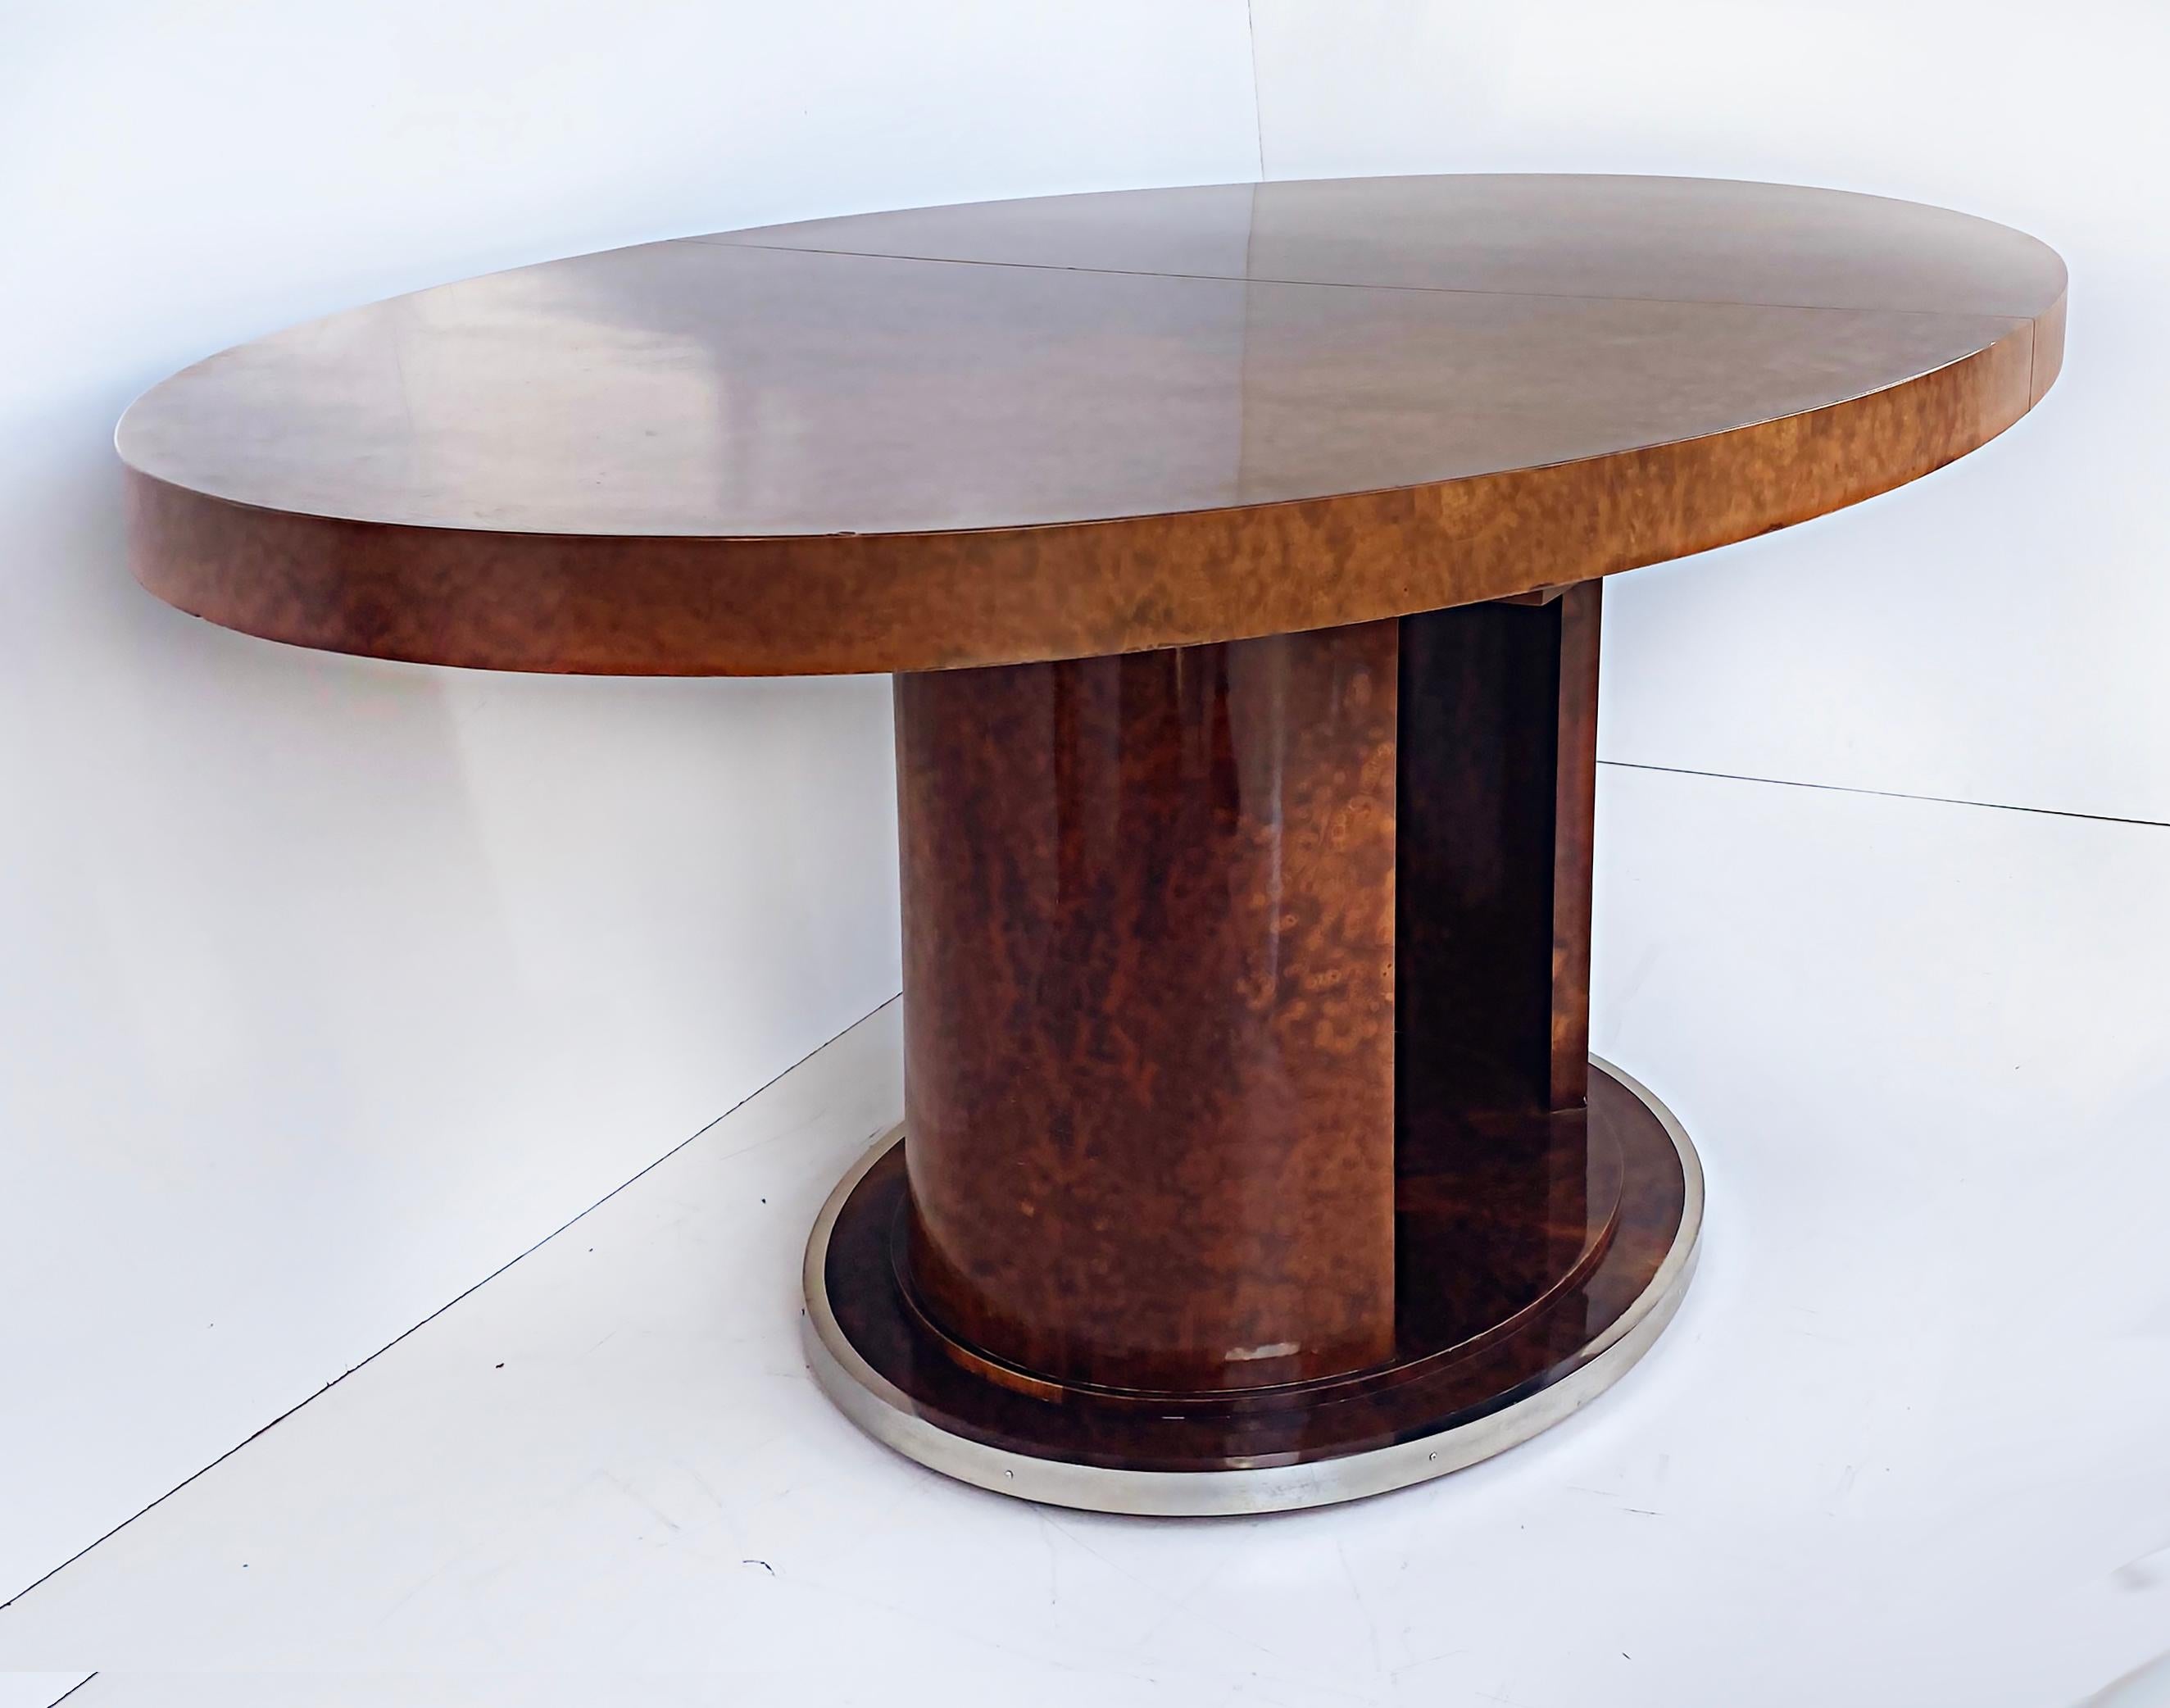 French Art Deco Rinck Paris Burlwood Dining Table 1930s, Extending Oval Pedestal In Good Condition In Miami, FL